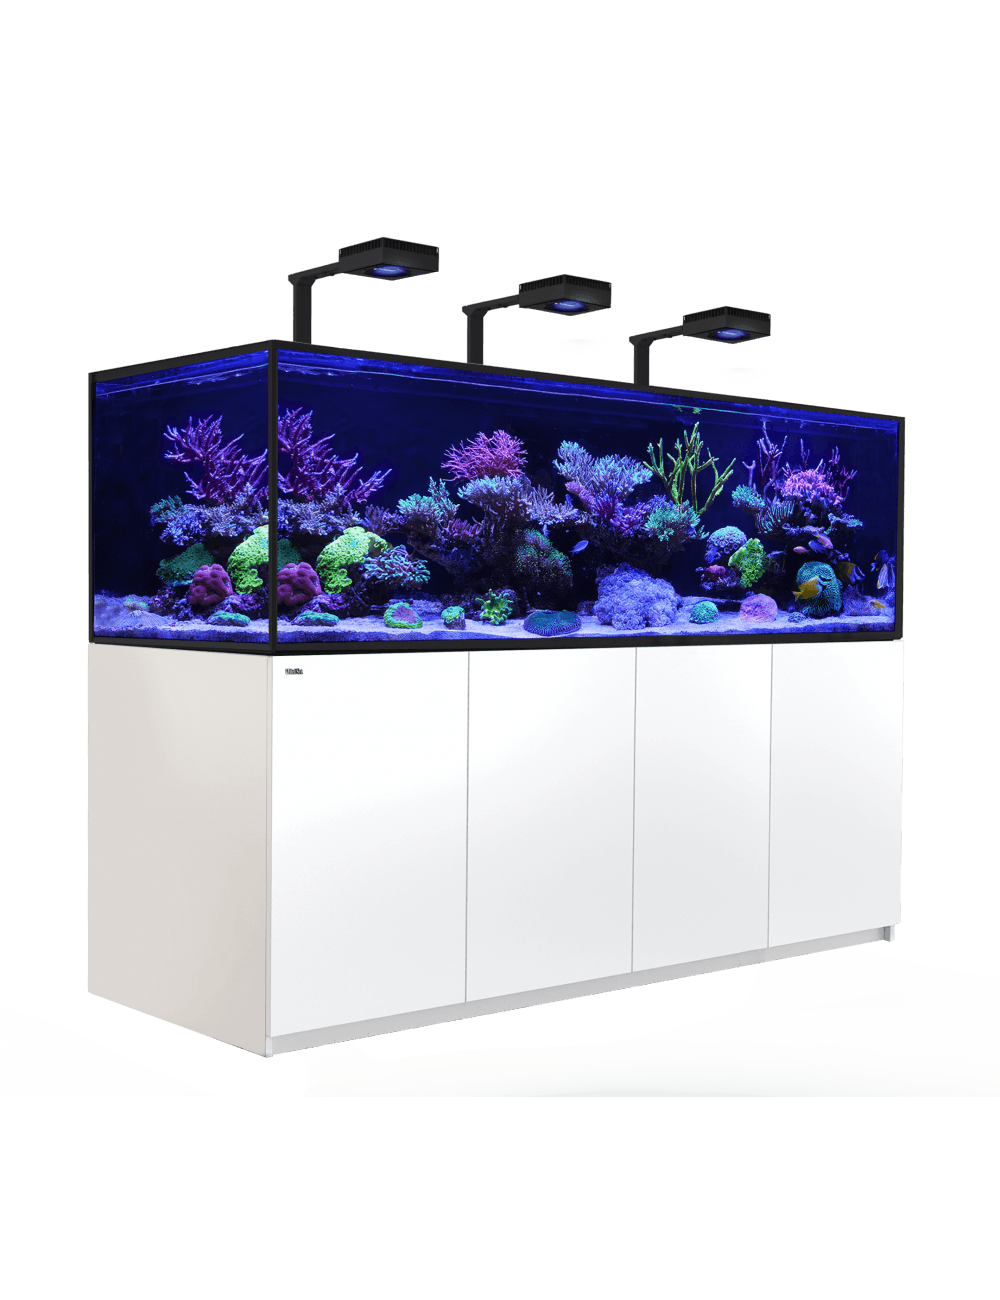 red-sea-reefer-deluxe-s-1000-blanc-1000-l-grands-systemes-recifaux-premium-avec-reefled-160s